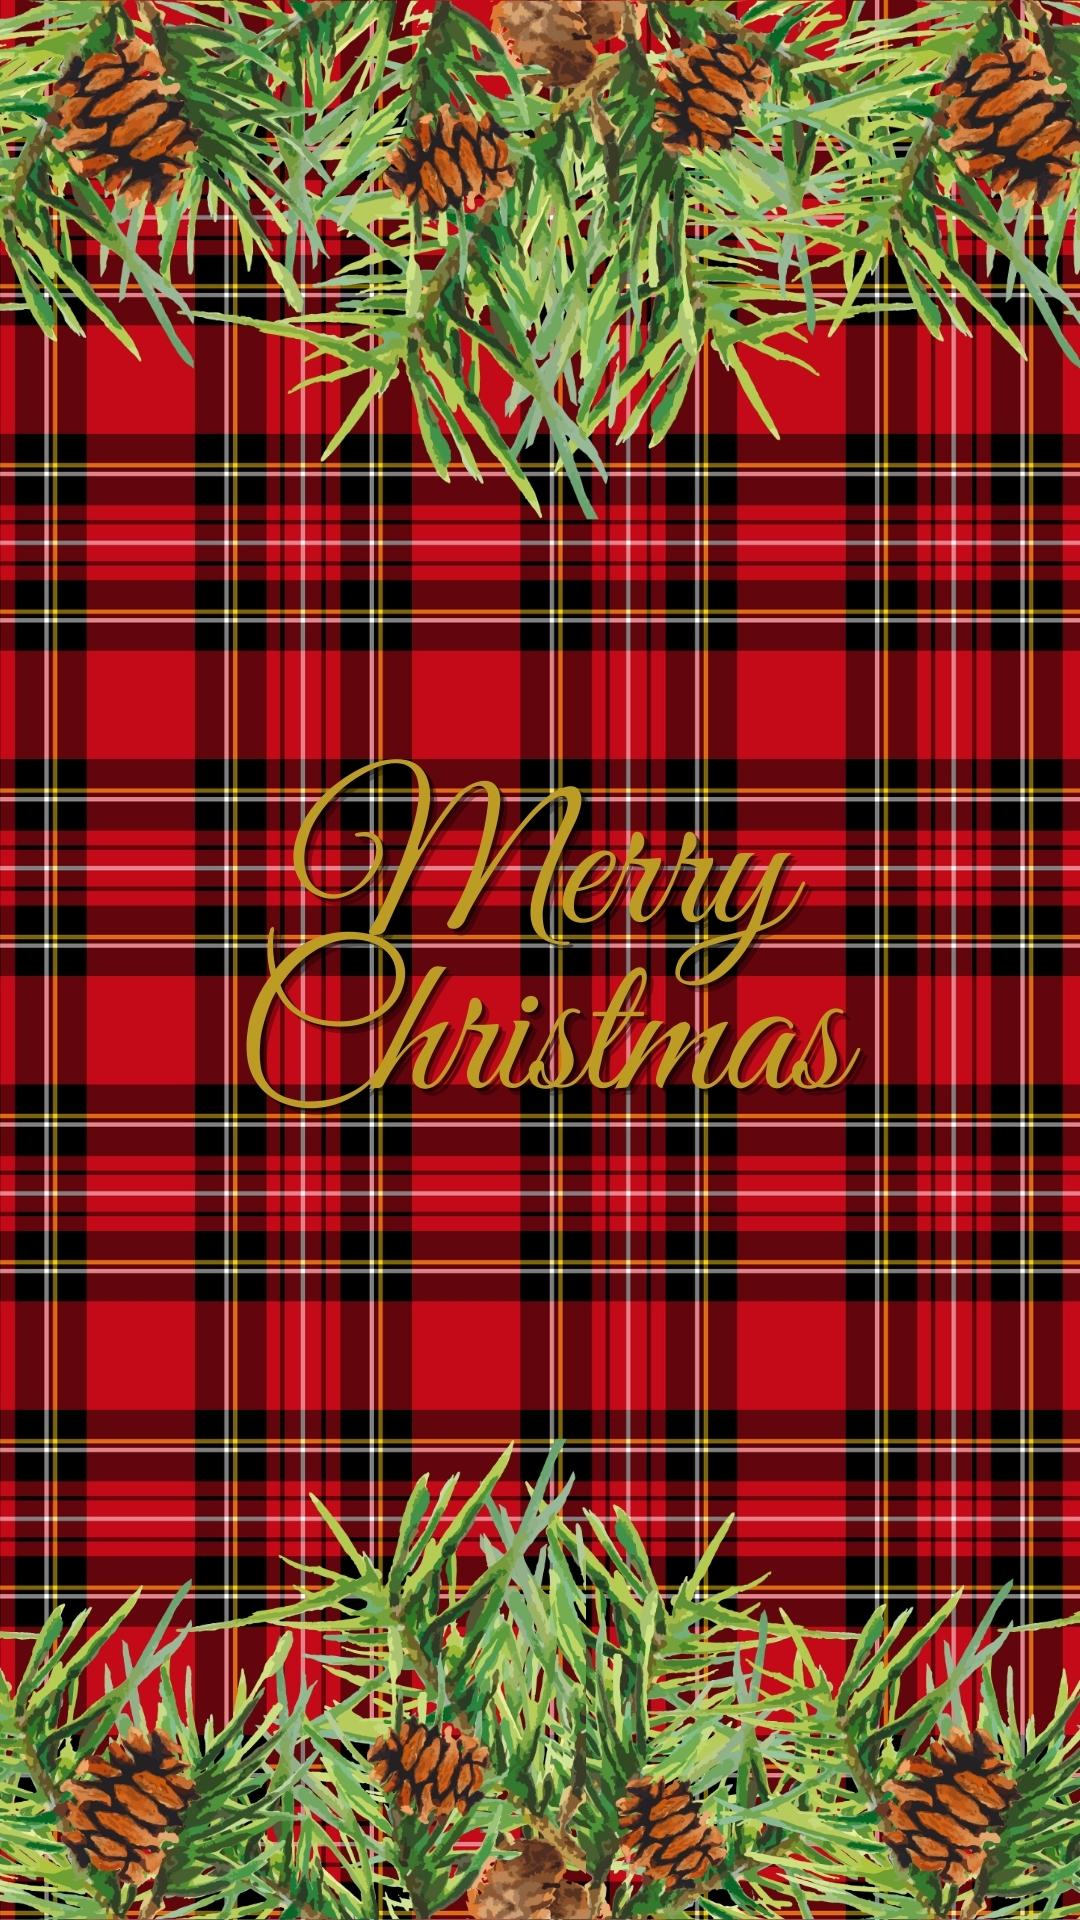 merry christmas backgrounds